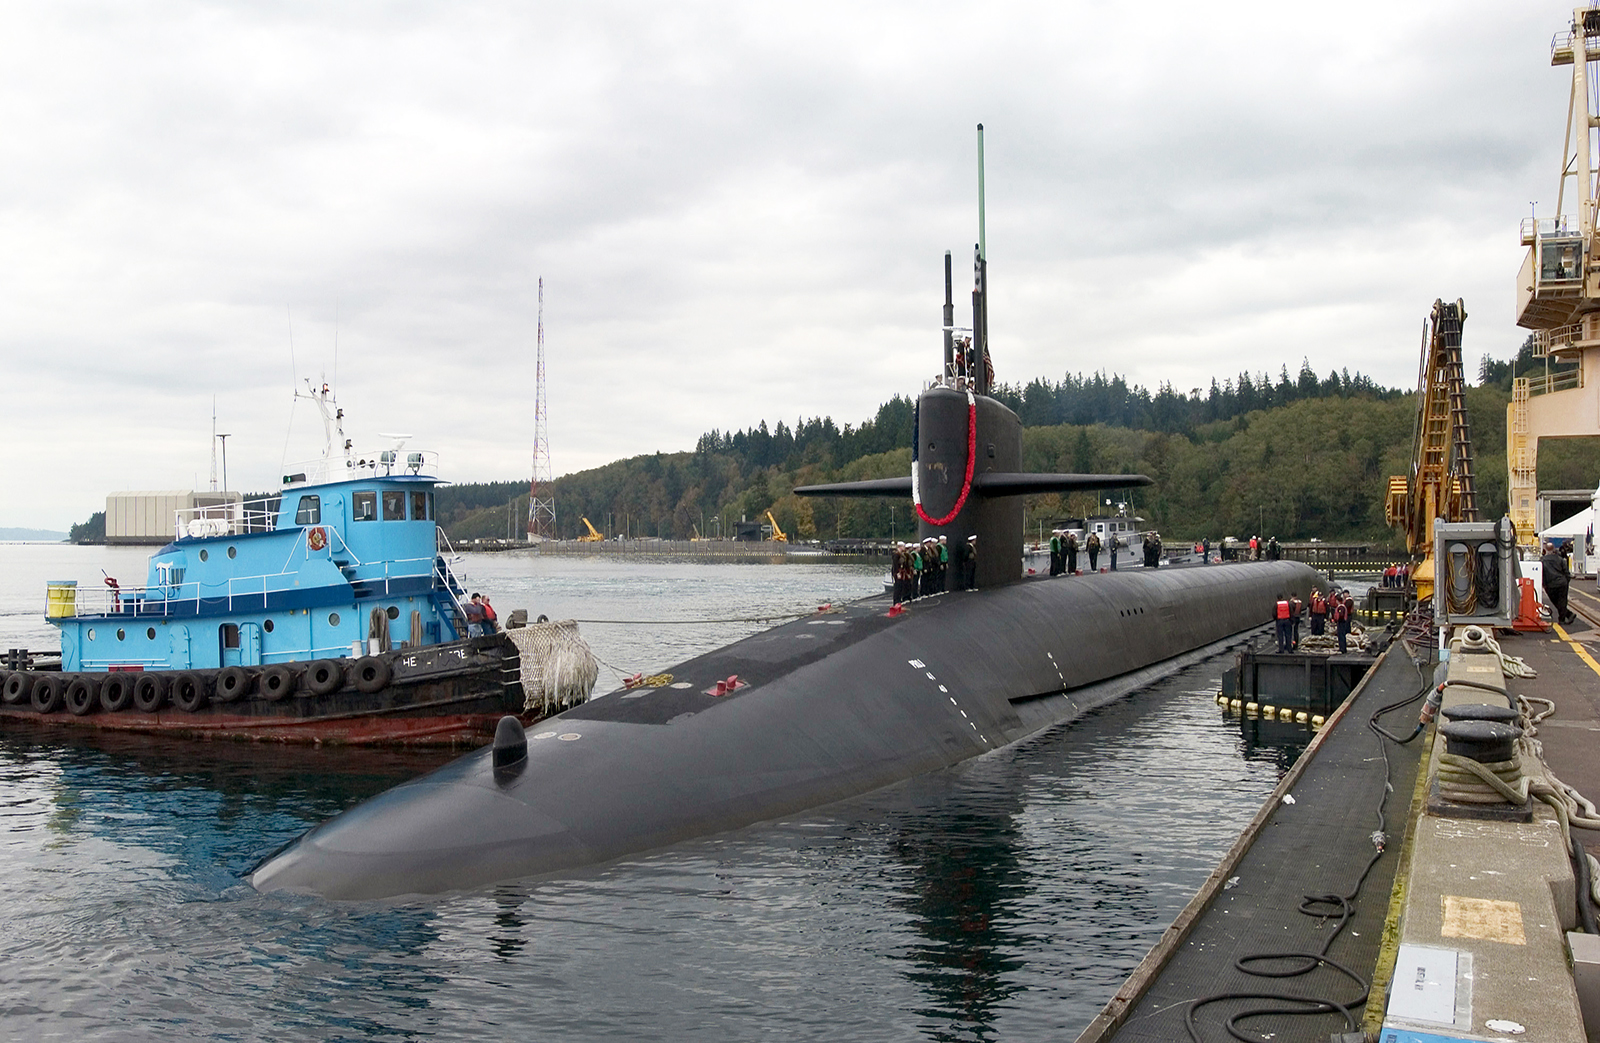 A starboard bow view of the US Navy (USN) OHIO CLASS: Strategic Missile Submarine, USS NEBRASKA (SSBN 739), showing Sailors manning the rails as the ship is assisted by a commercial tugboat, while mooring at its new homeport for the first time at the Delta Pier located at Naval Base Kitsap–Bangor, Washington (WA).  (Duplicate image, see also DNSD0610169 or search 041020N6497N044)